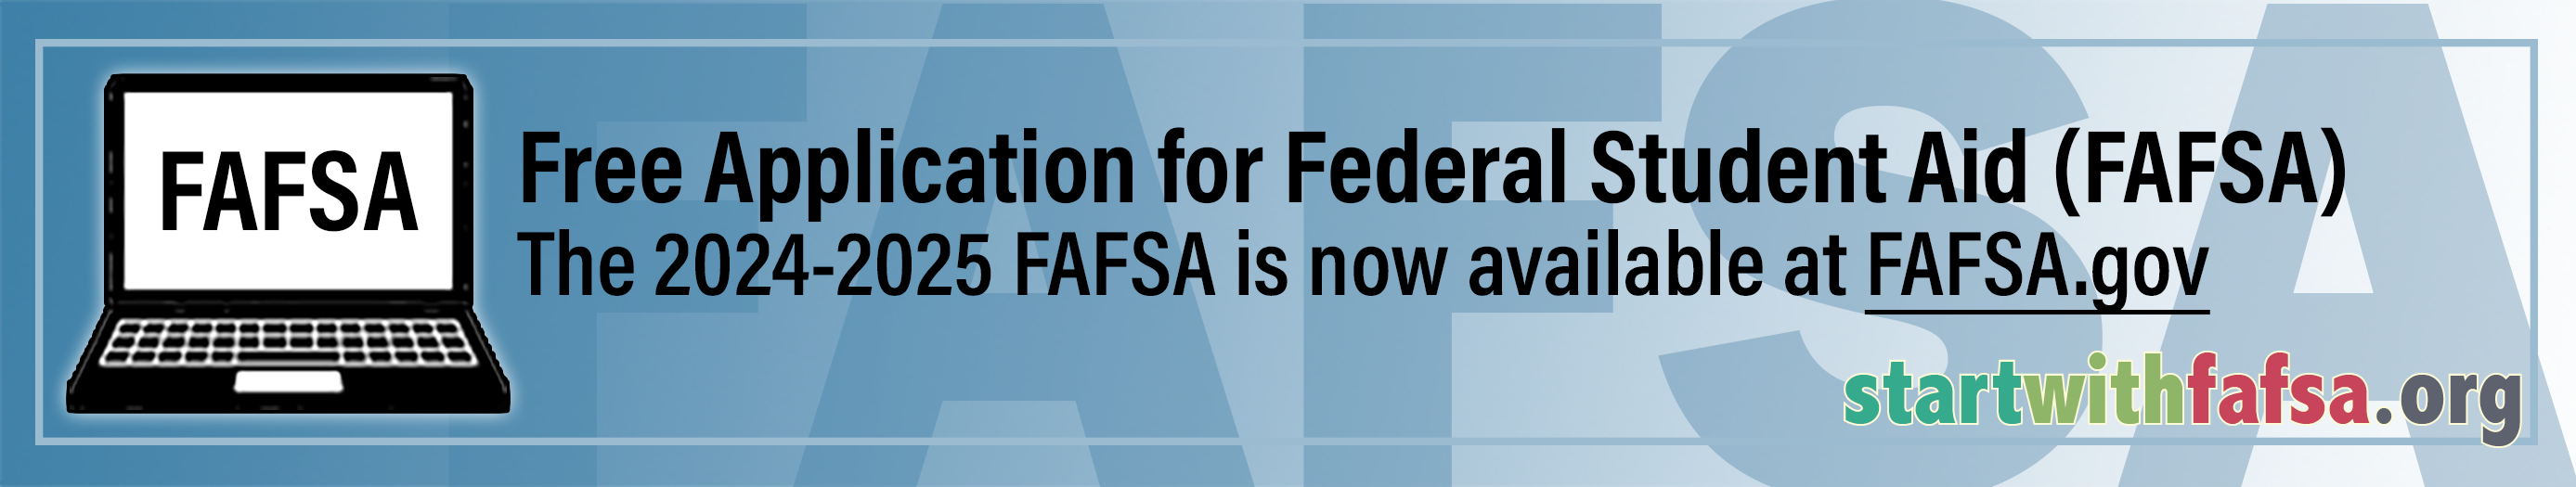 Have you submitted the FAFSA? StartWithFAFSA.org